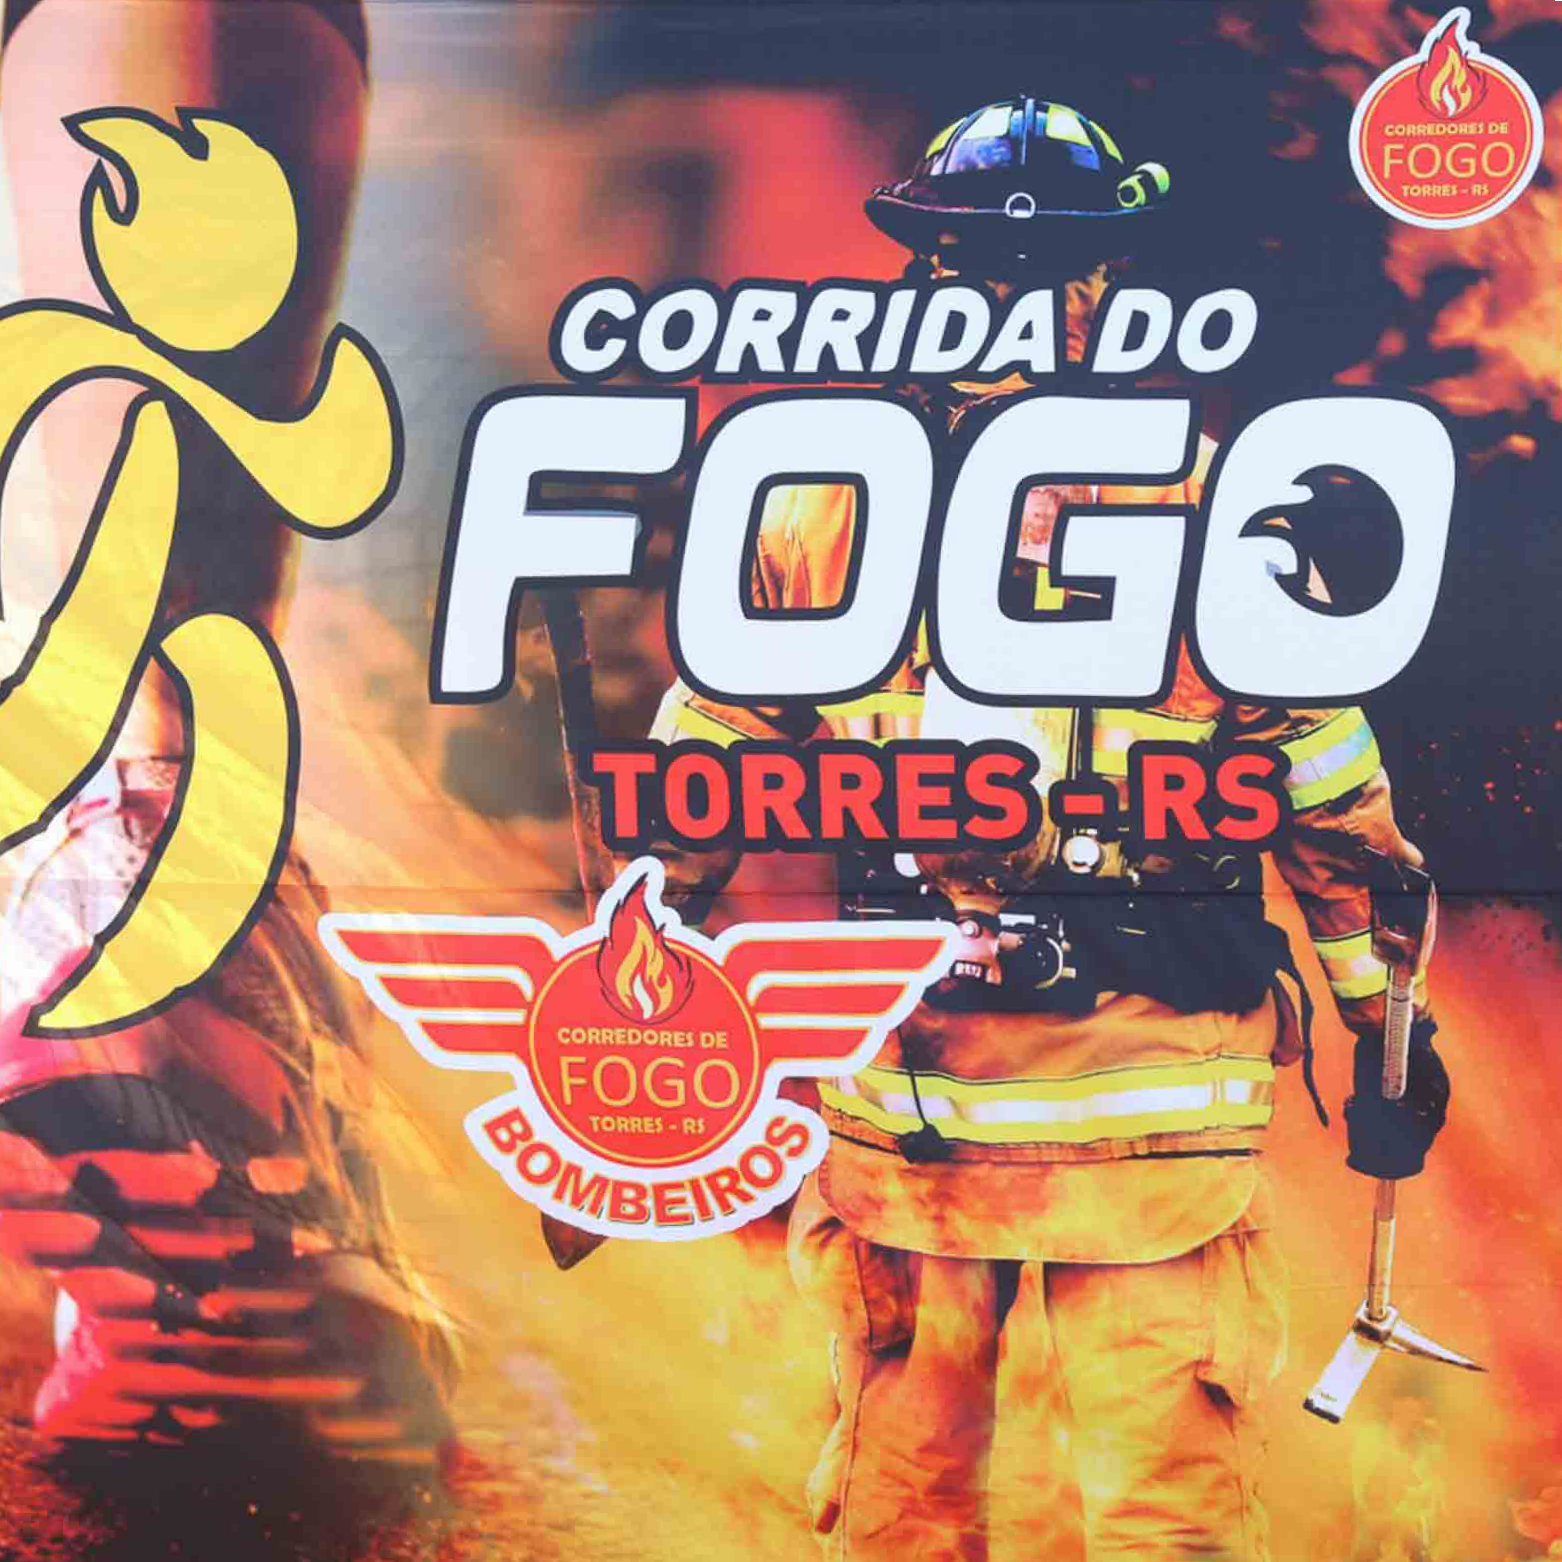 You are currently viewing Corrida do Fogo – Torres / RS